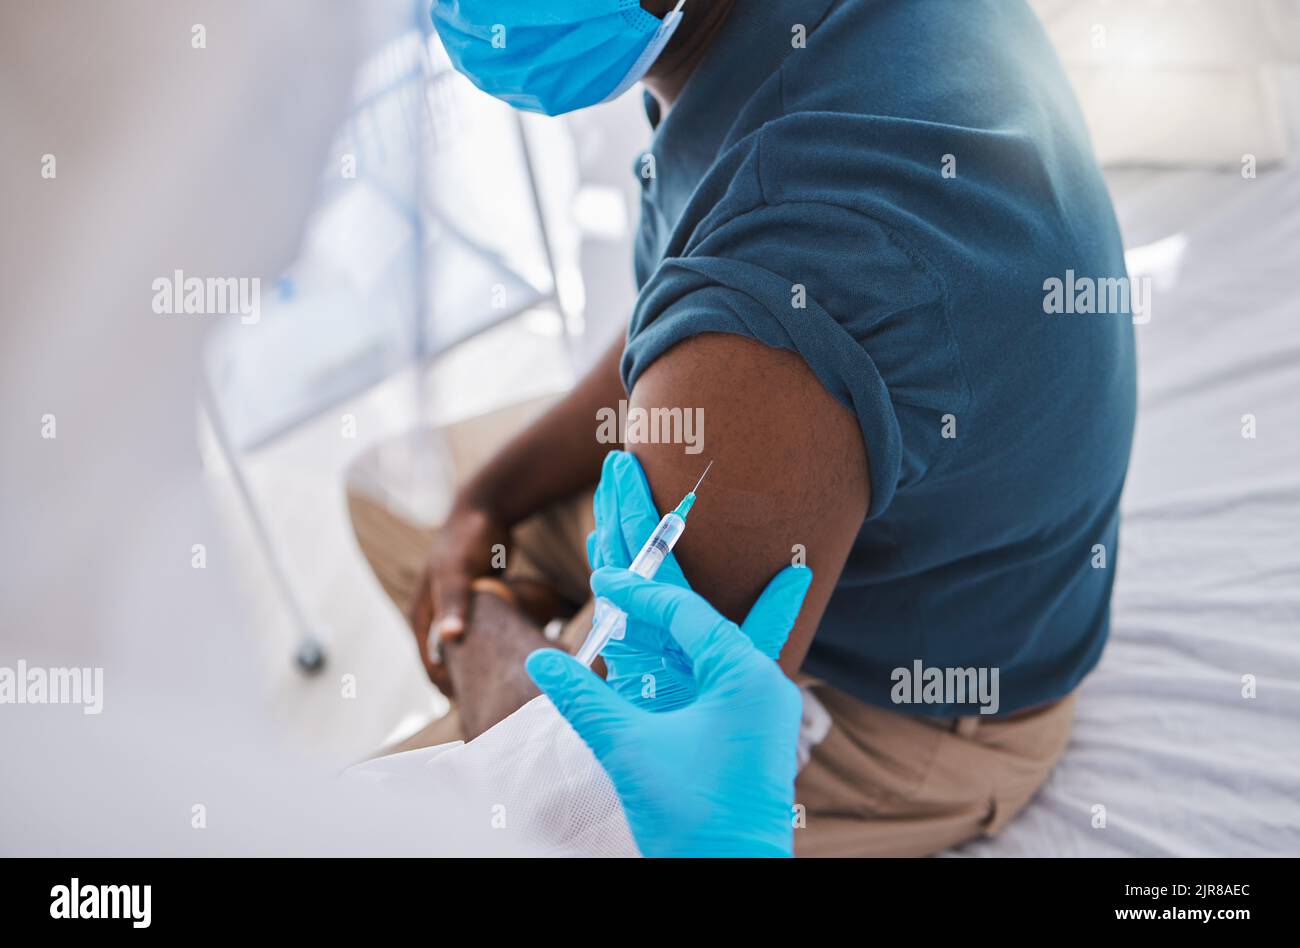 Vaccine, injection or medicine cure for covid, monkeypox and ebola with trust doctor, healthcare or medical worker. Physician in hazmat suit with Stock Photo